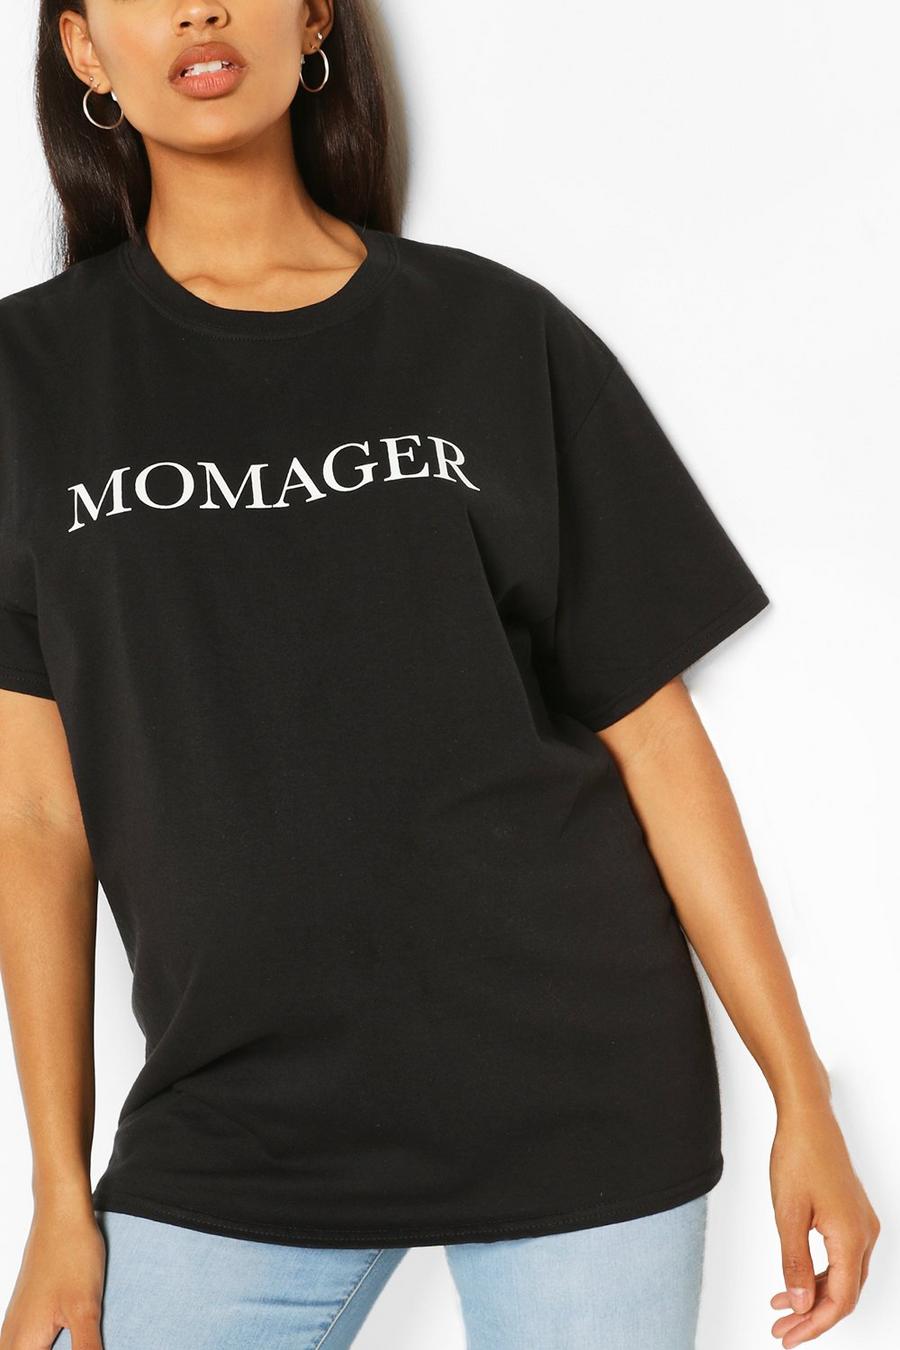 T-shirt premaman con scritta “Momager”, Nero image number 1